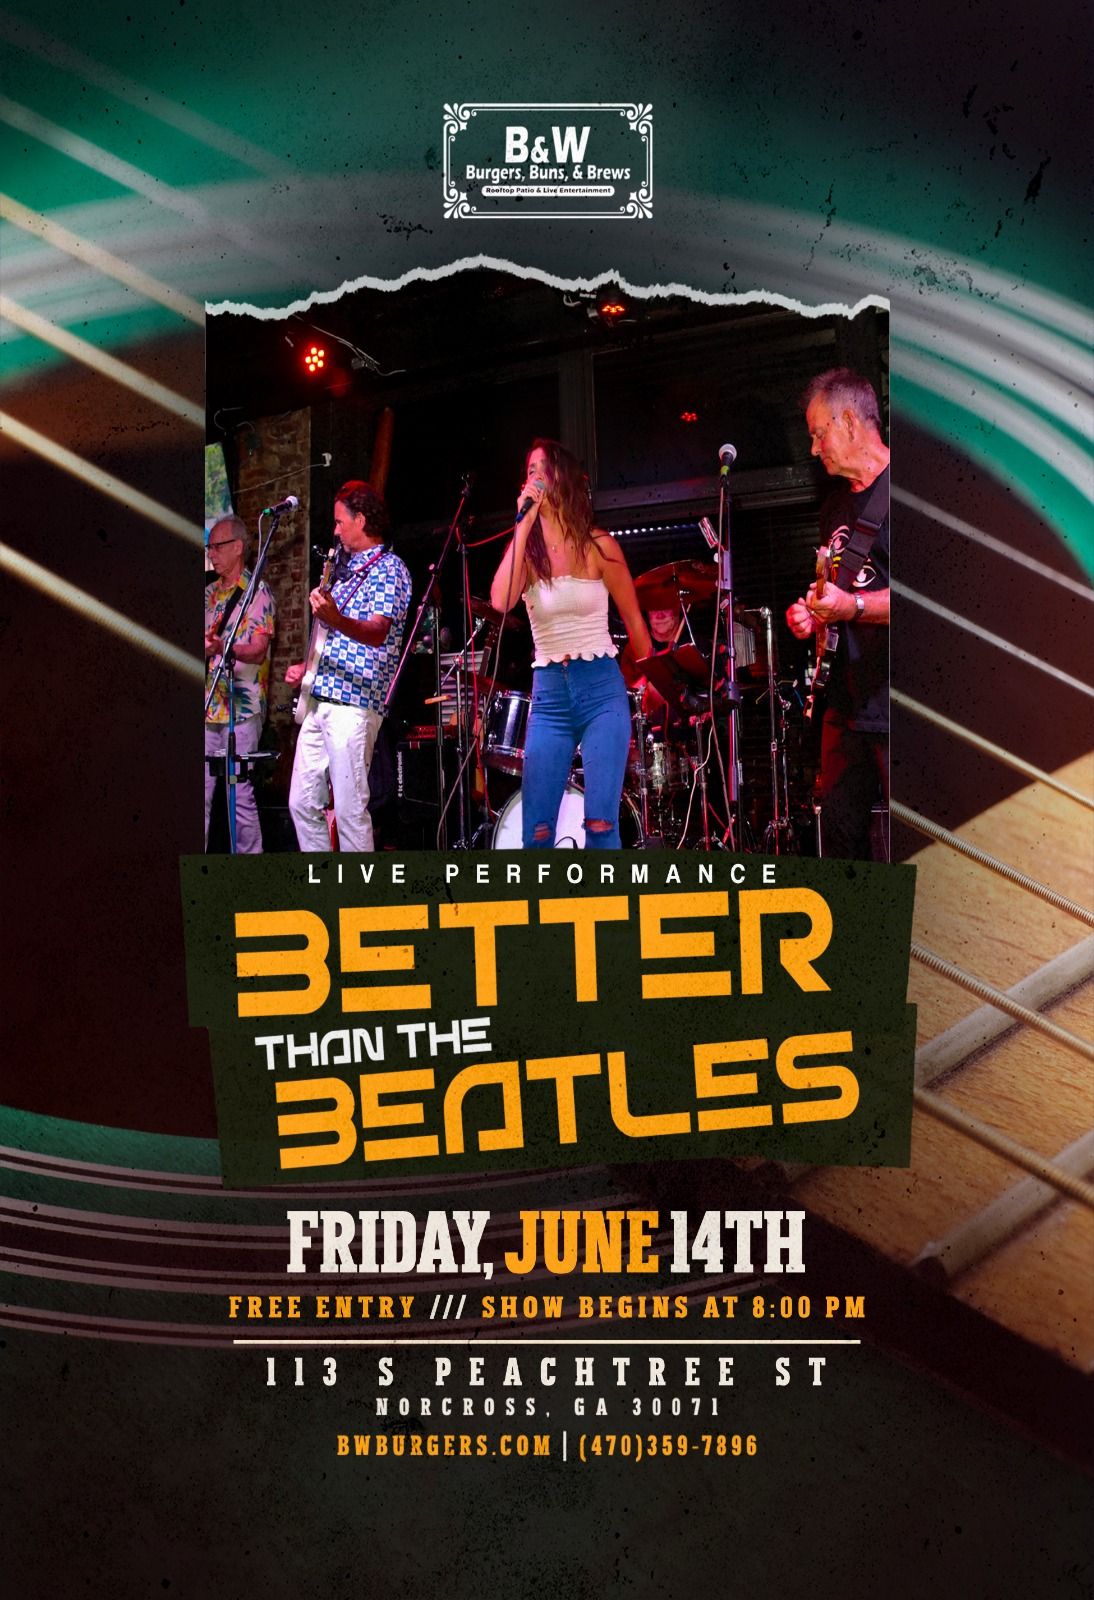 Better than the Beatles (FREE EVENT)